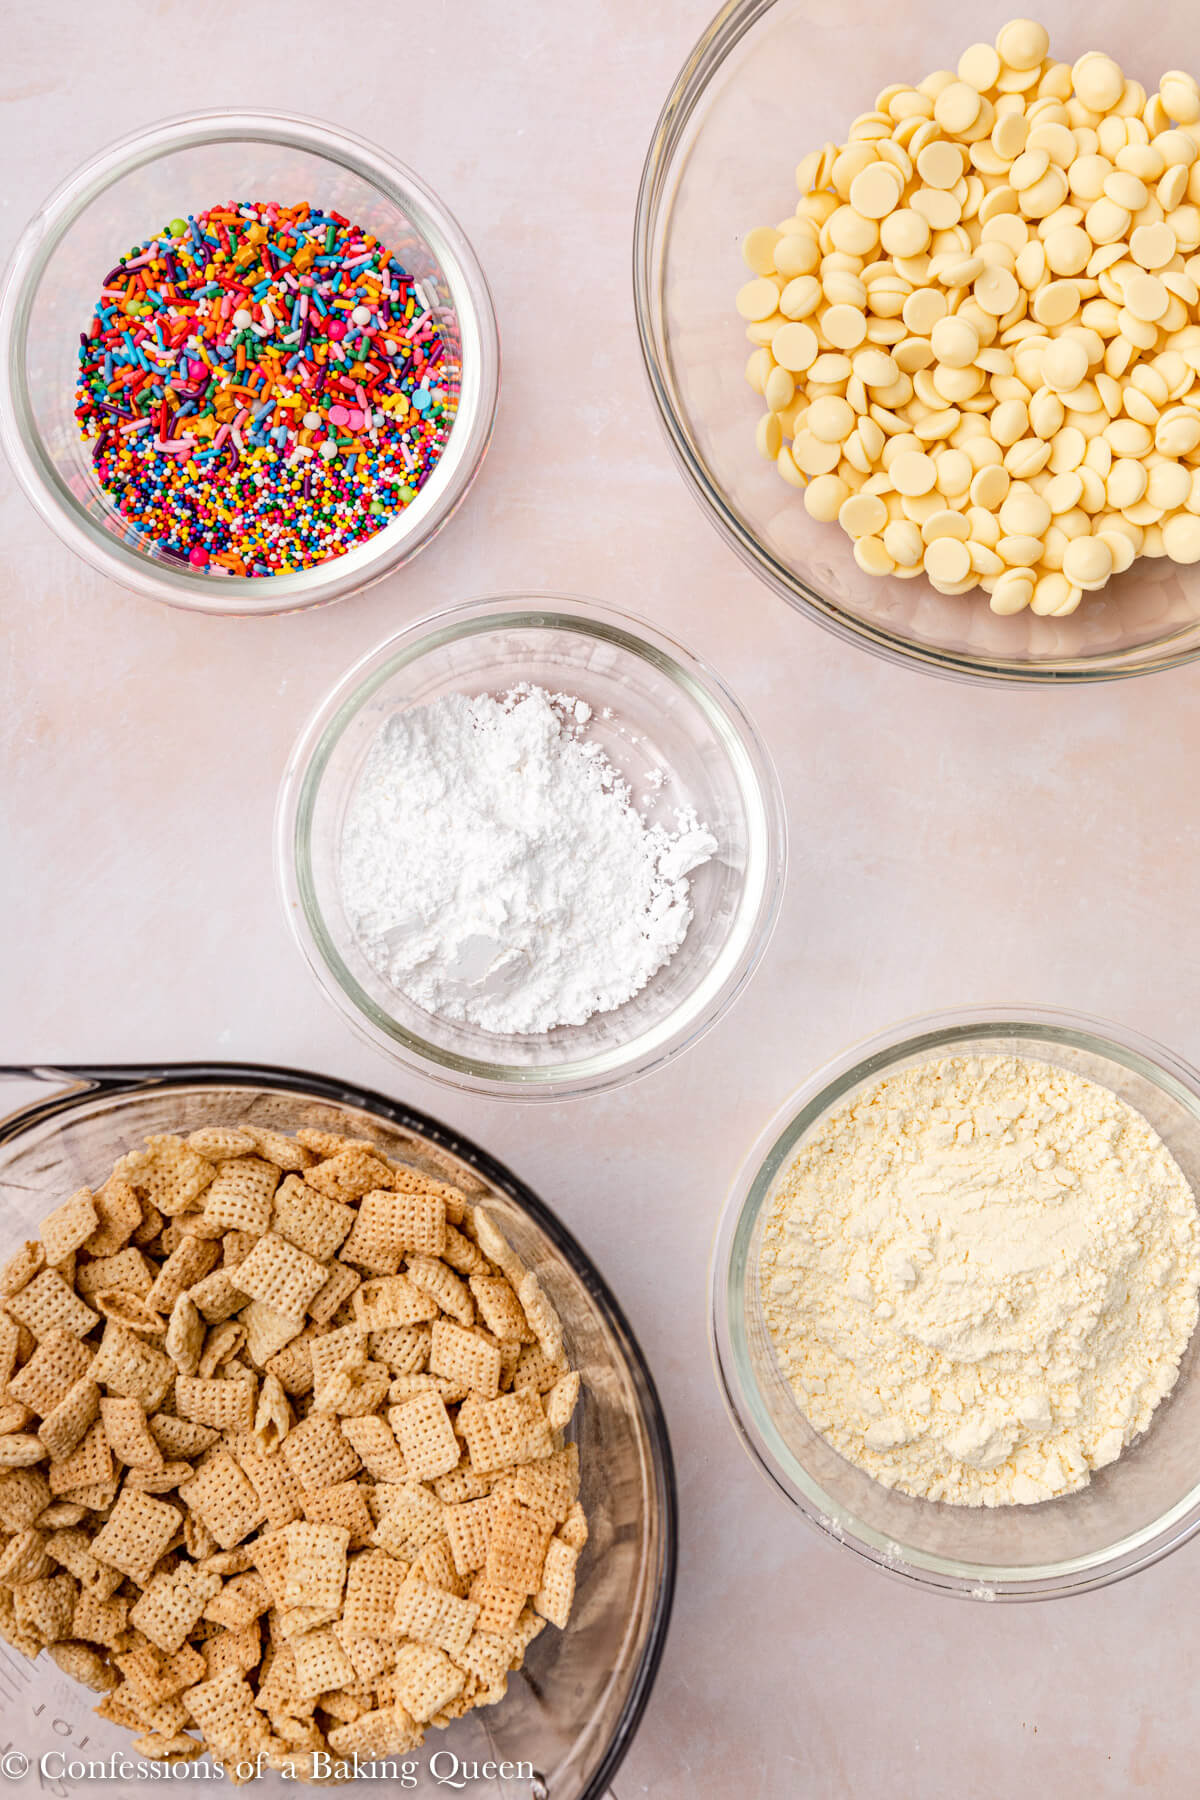 ingredients for cake batter puppy chow in individual bowls on a light pink surface